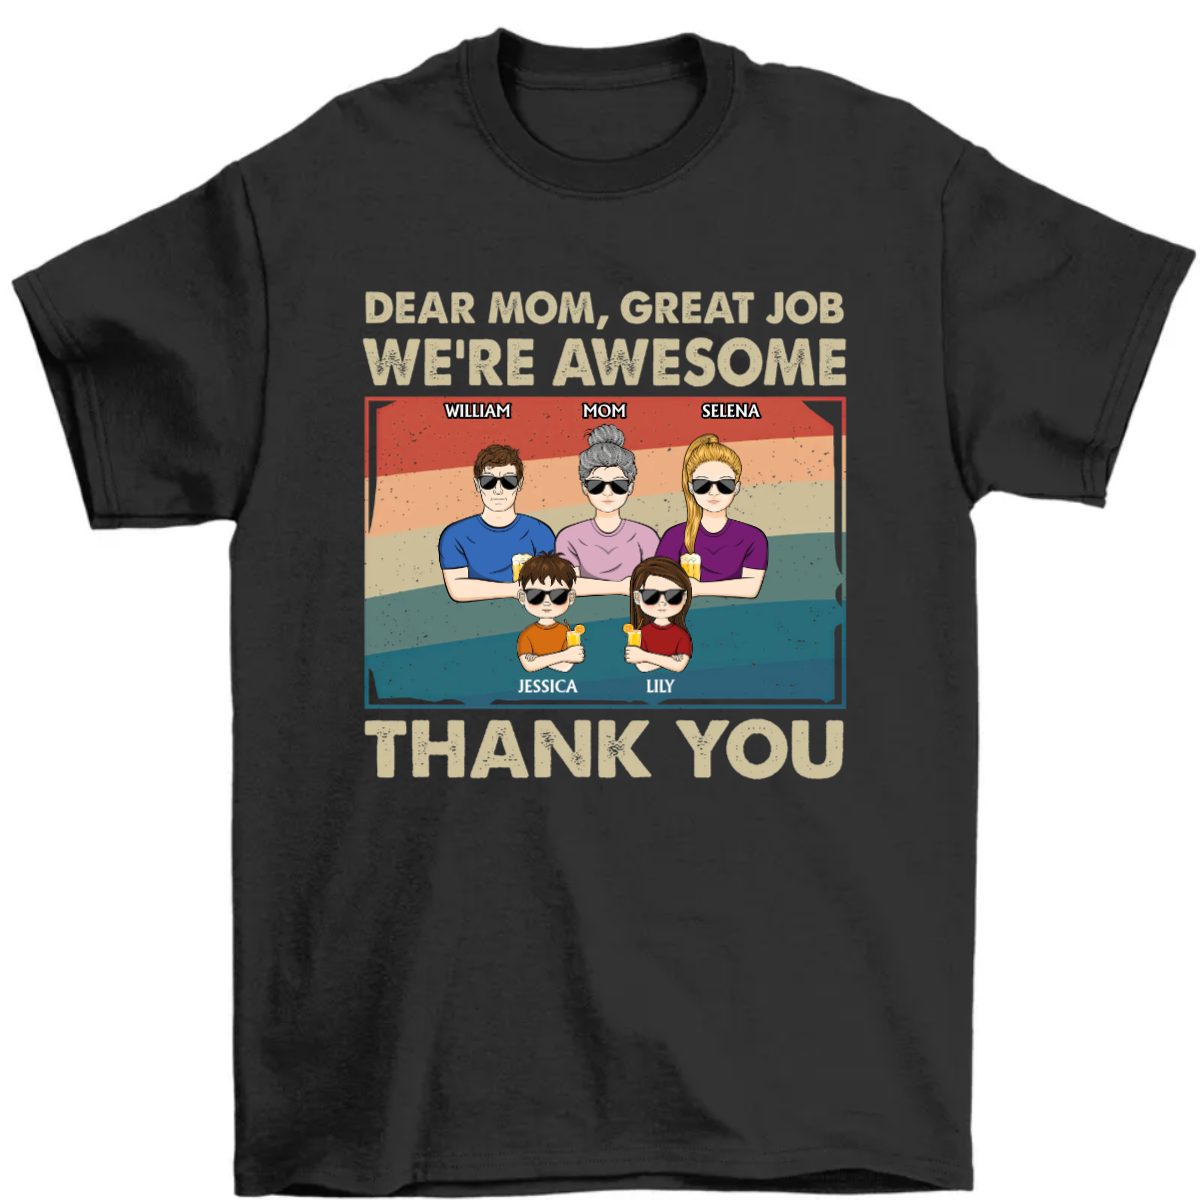 Dear Mom Great Job We're Awesome Thank You - Adult And Kid - Mother Gift - Personalized Custom T Shirt